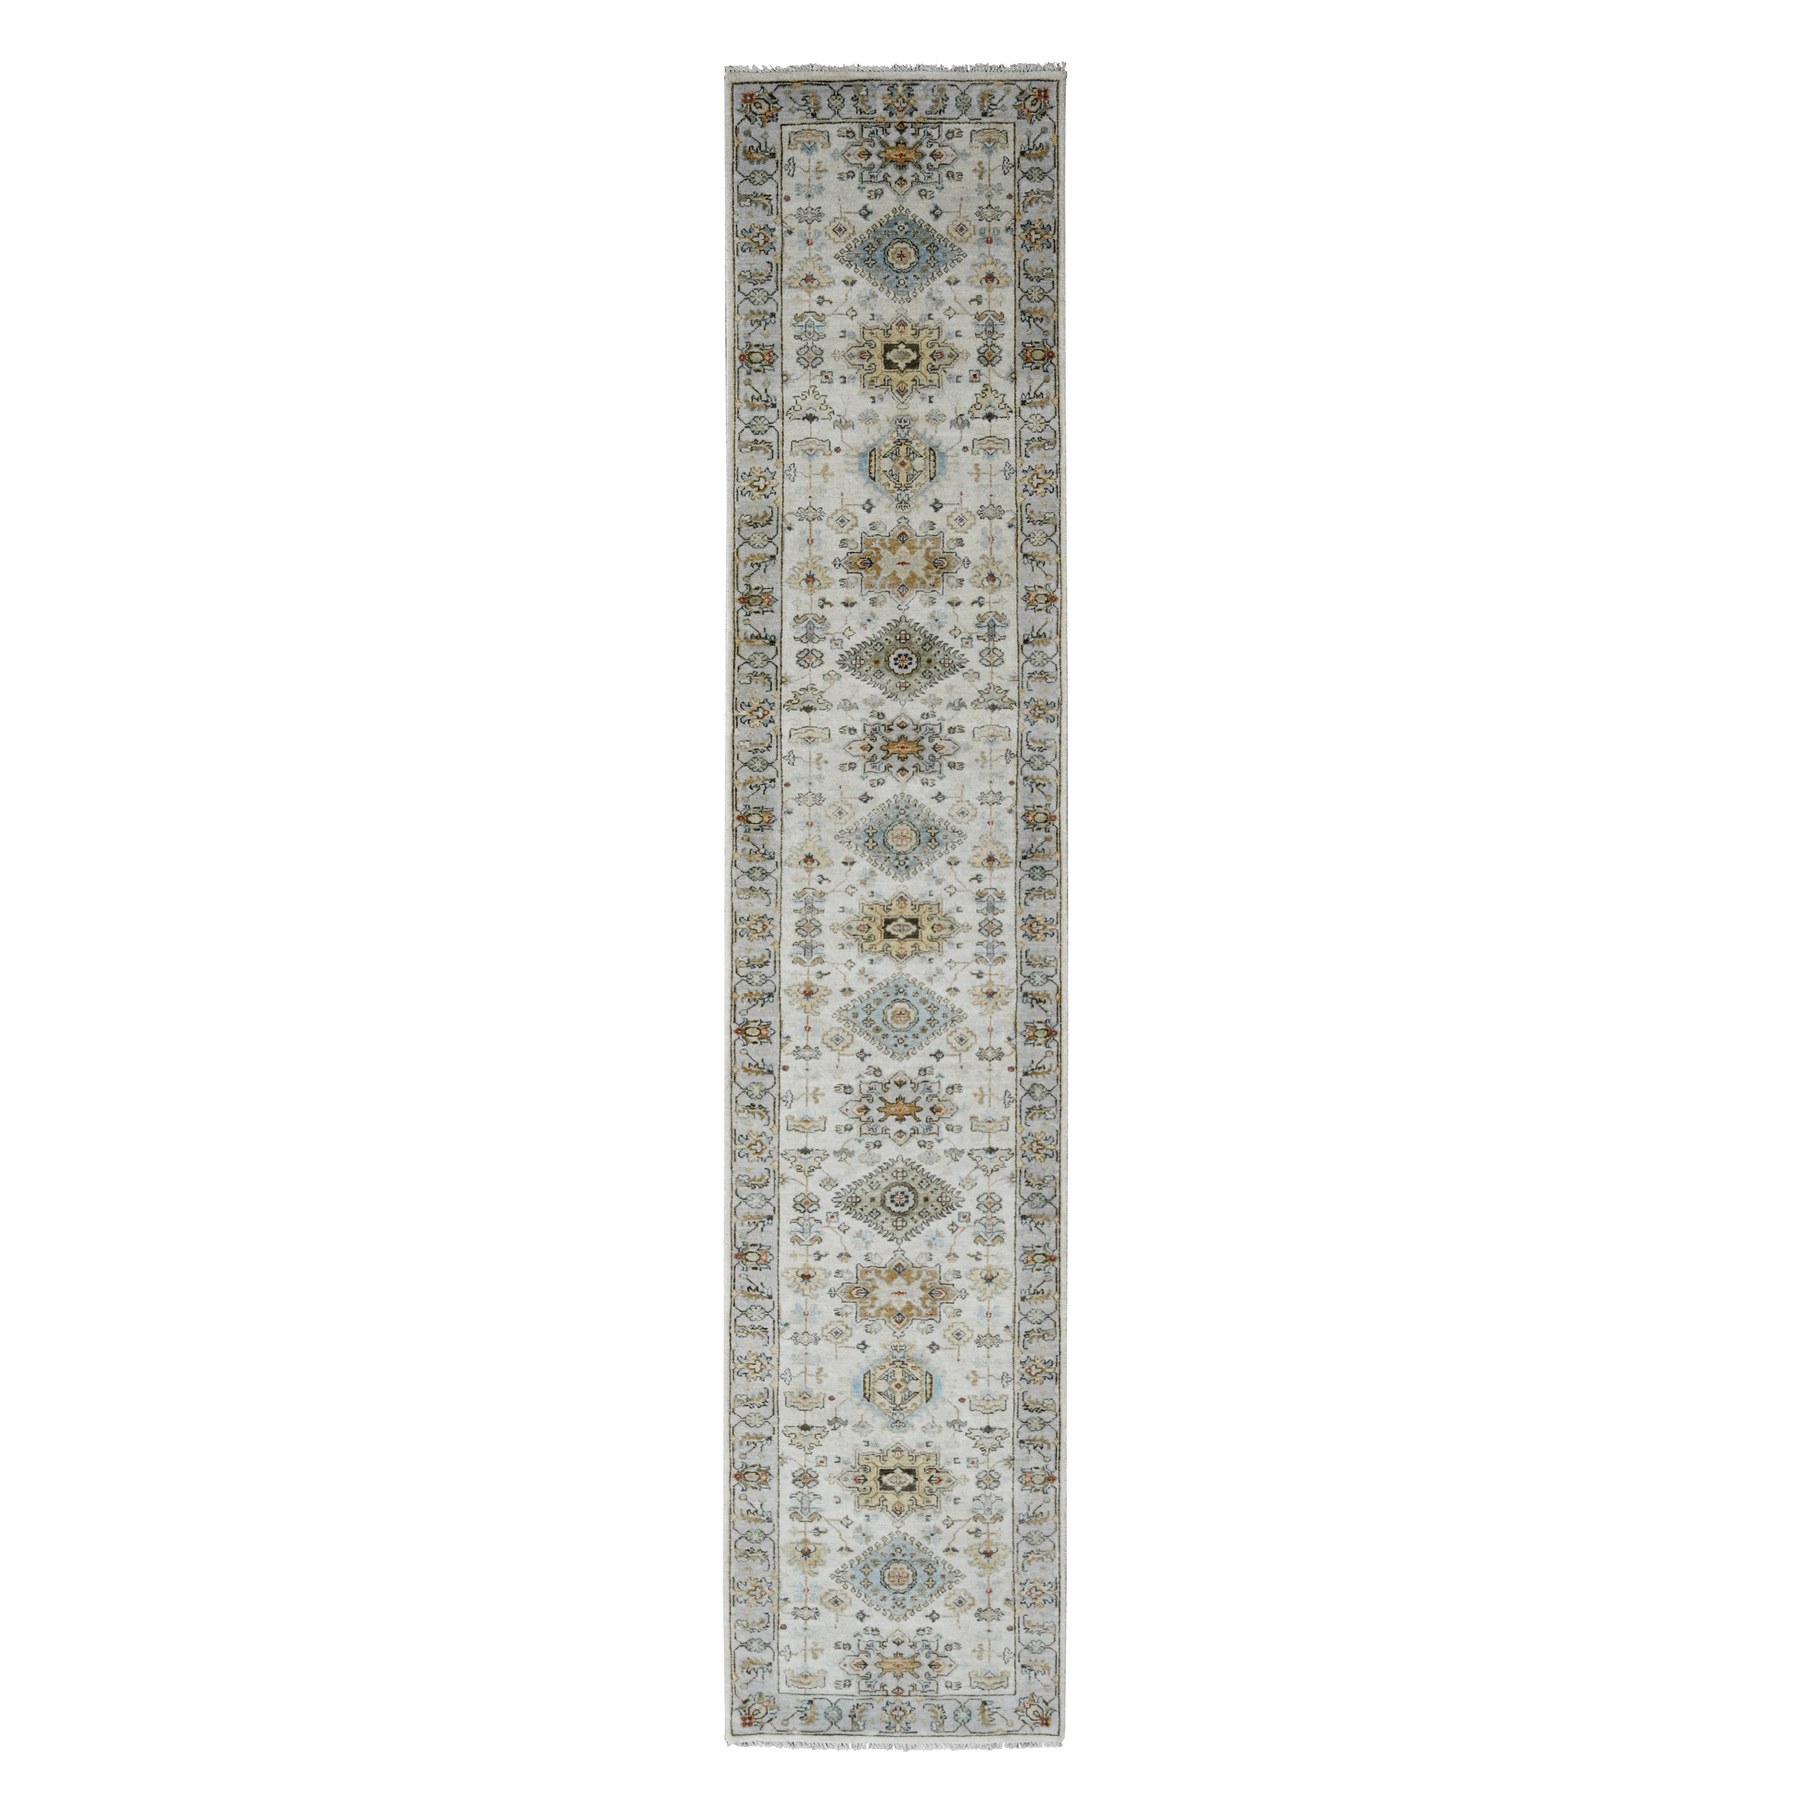 Snowbound White With American Silver Gray, Tribal Geometric Motifs Hand Knotted Karajeh Design, Vegetable Dyes, Soft Pile, 100% Wool, Runner Oriental Rug